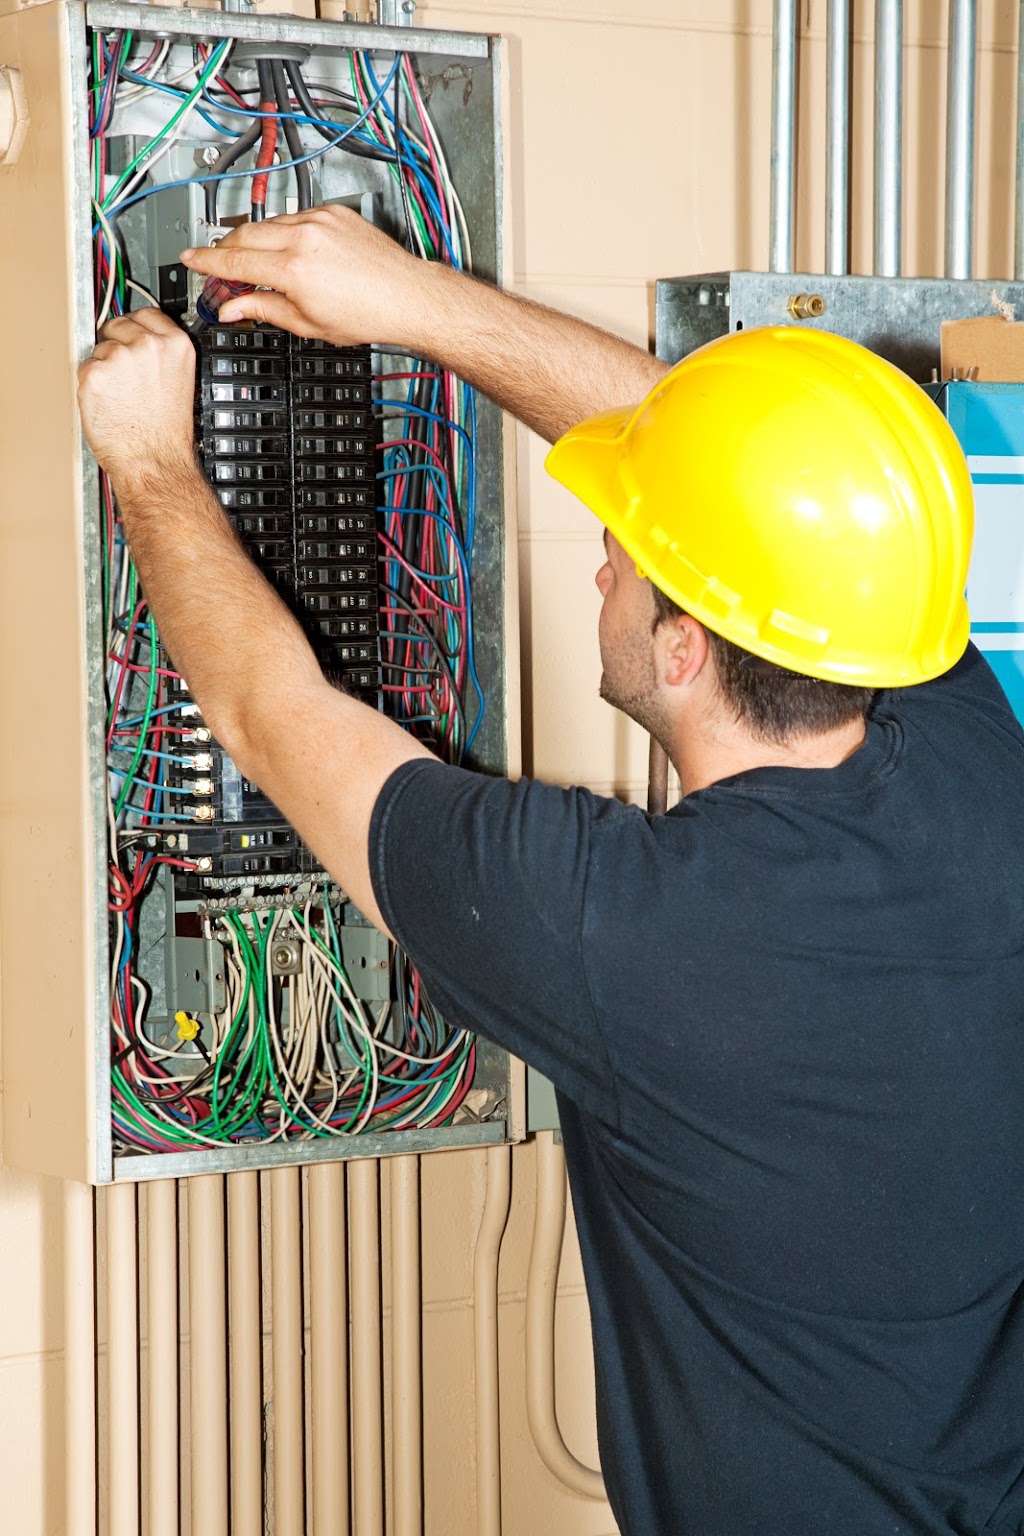 Electrician Manly | Electrician, Manly QLD 4179, Australia | Phone: 0488 881 151